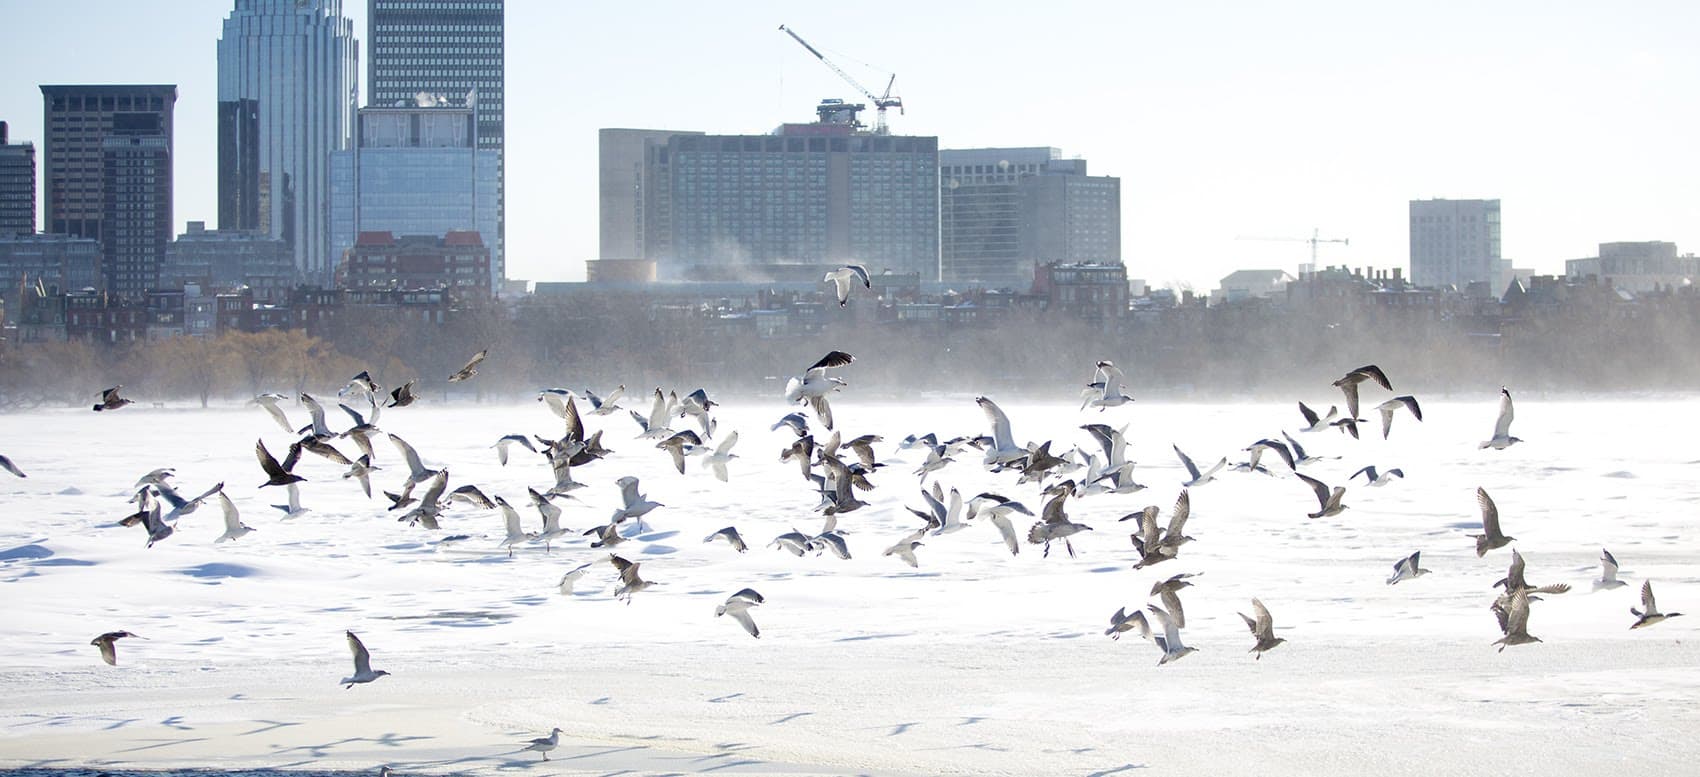 Birds take off from the snowy Charles River after a gust wind spooks them. (Jesse Costa/WBUR)